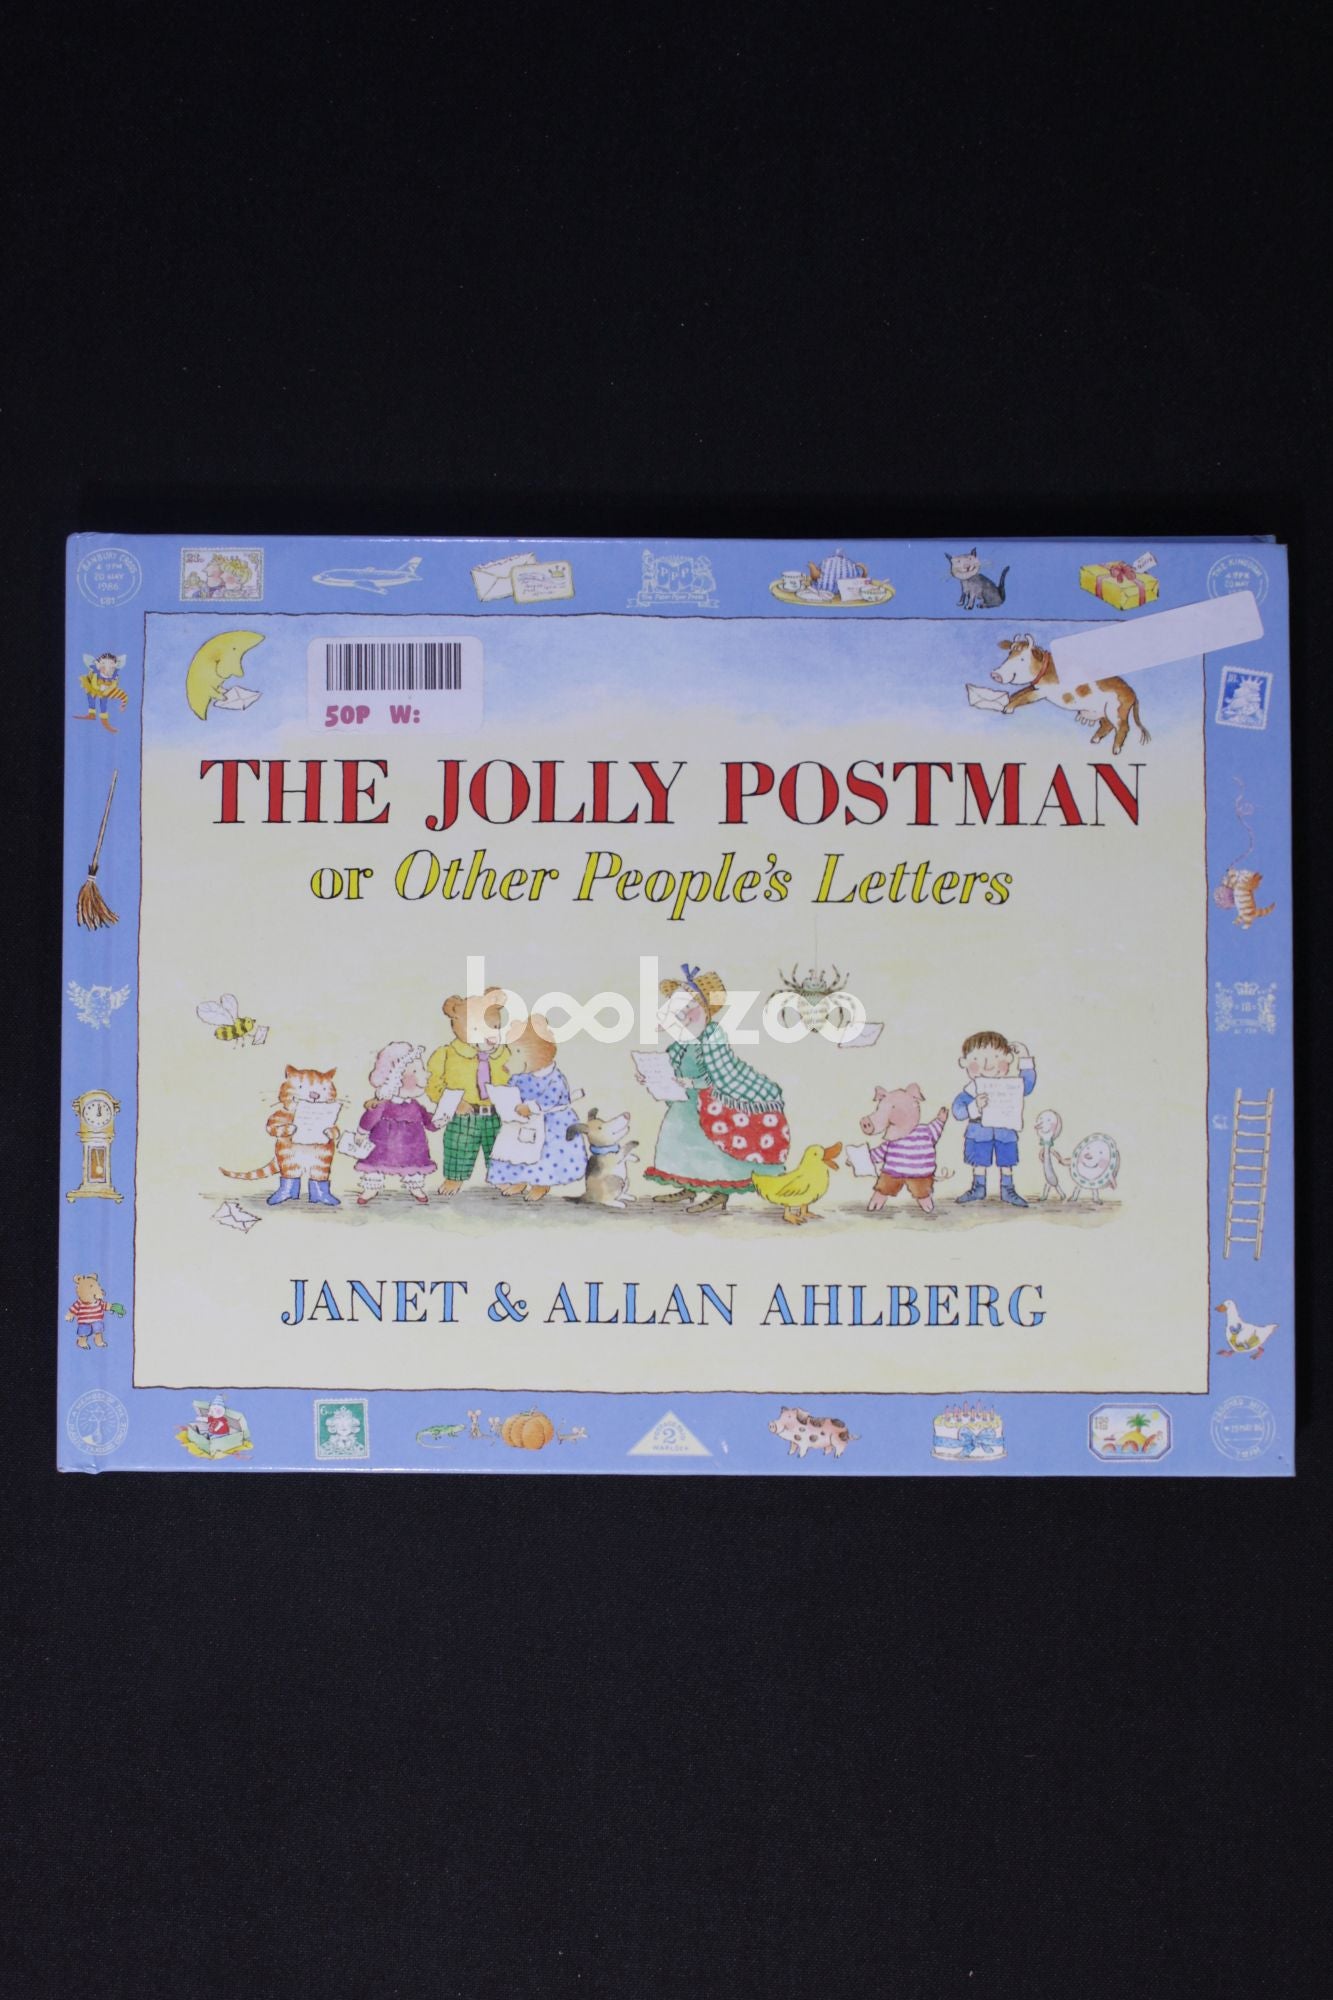 Buy　at　—　Other　bookstore　Ahlberg,　Postman　Letters　Allan　by　Janet　or　Online　The　Ahlberg　Jolly　People's